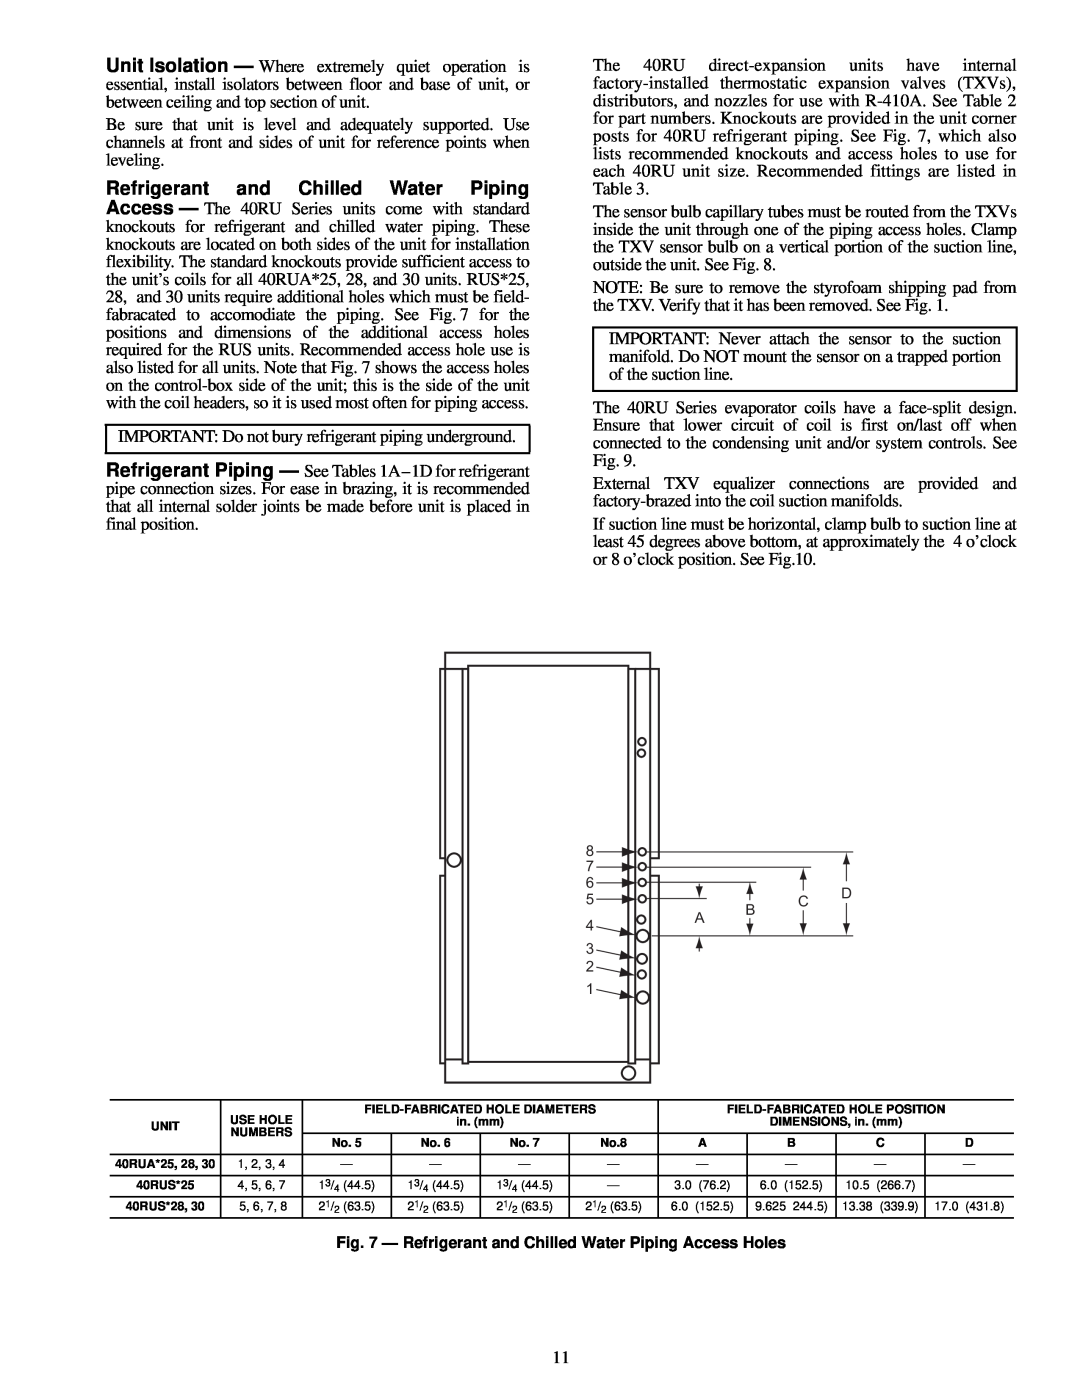 Carrier R-410A manual 